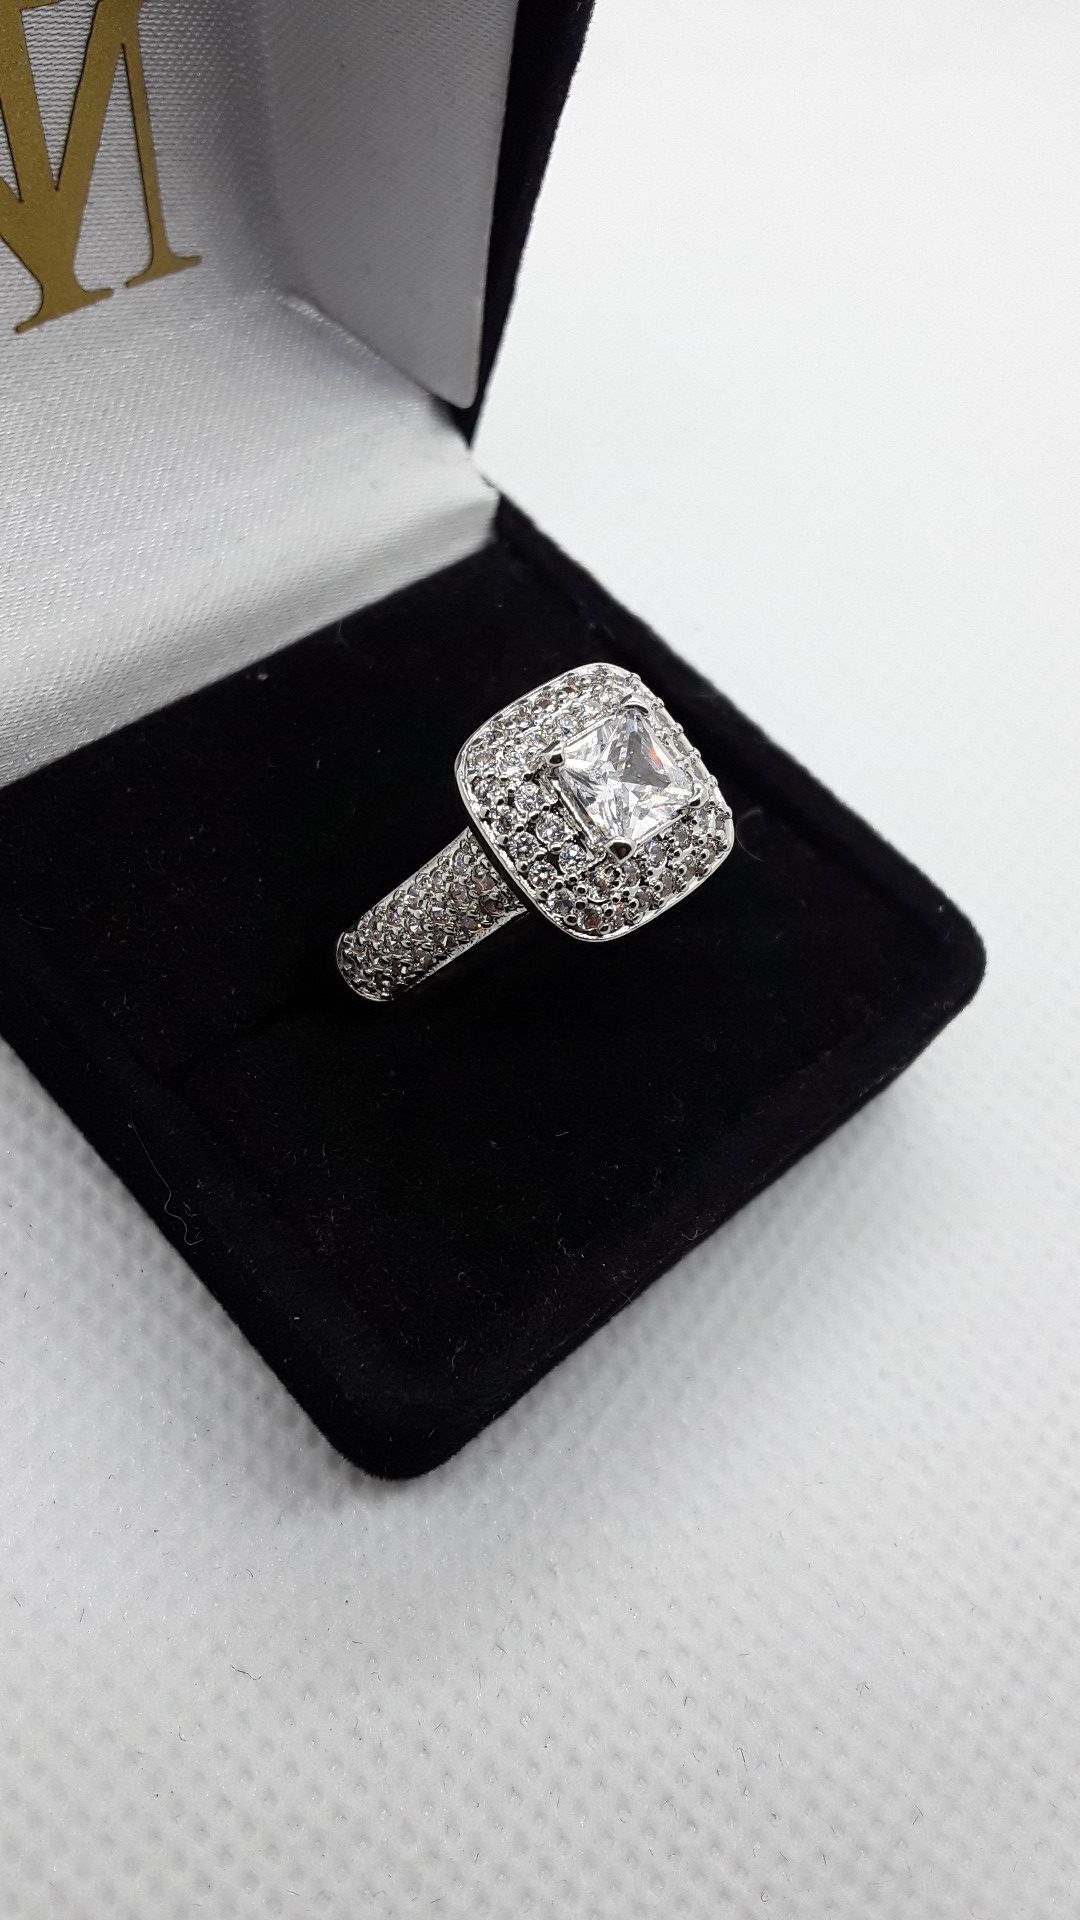 Size 7 large center stone CZ sparkly ring